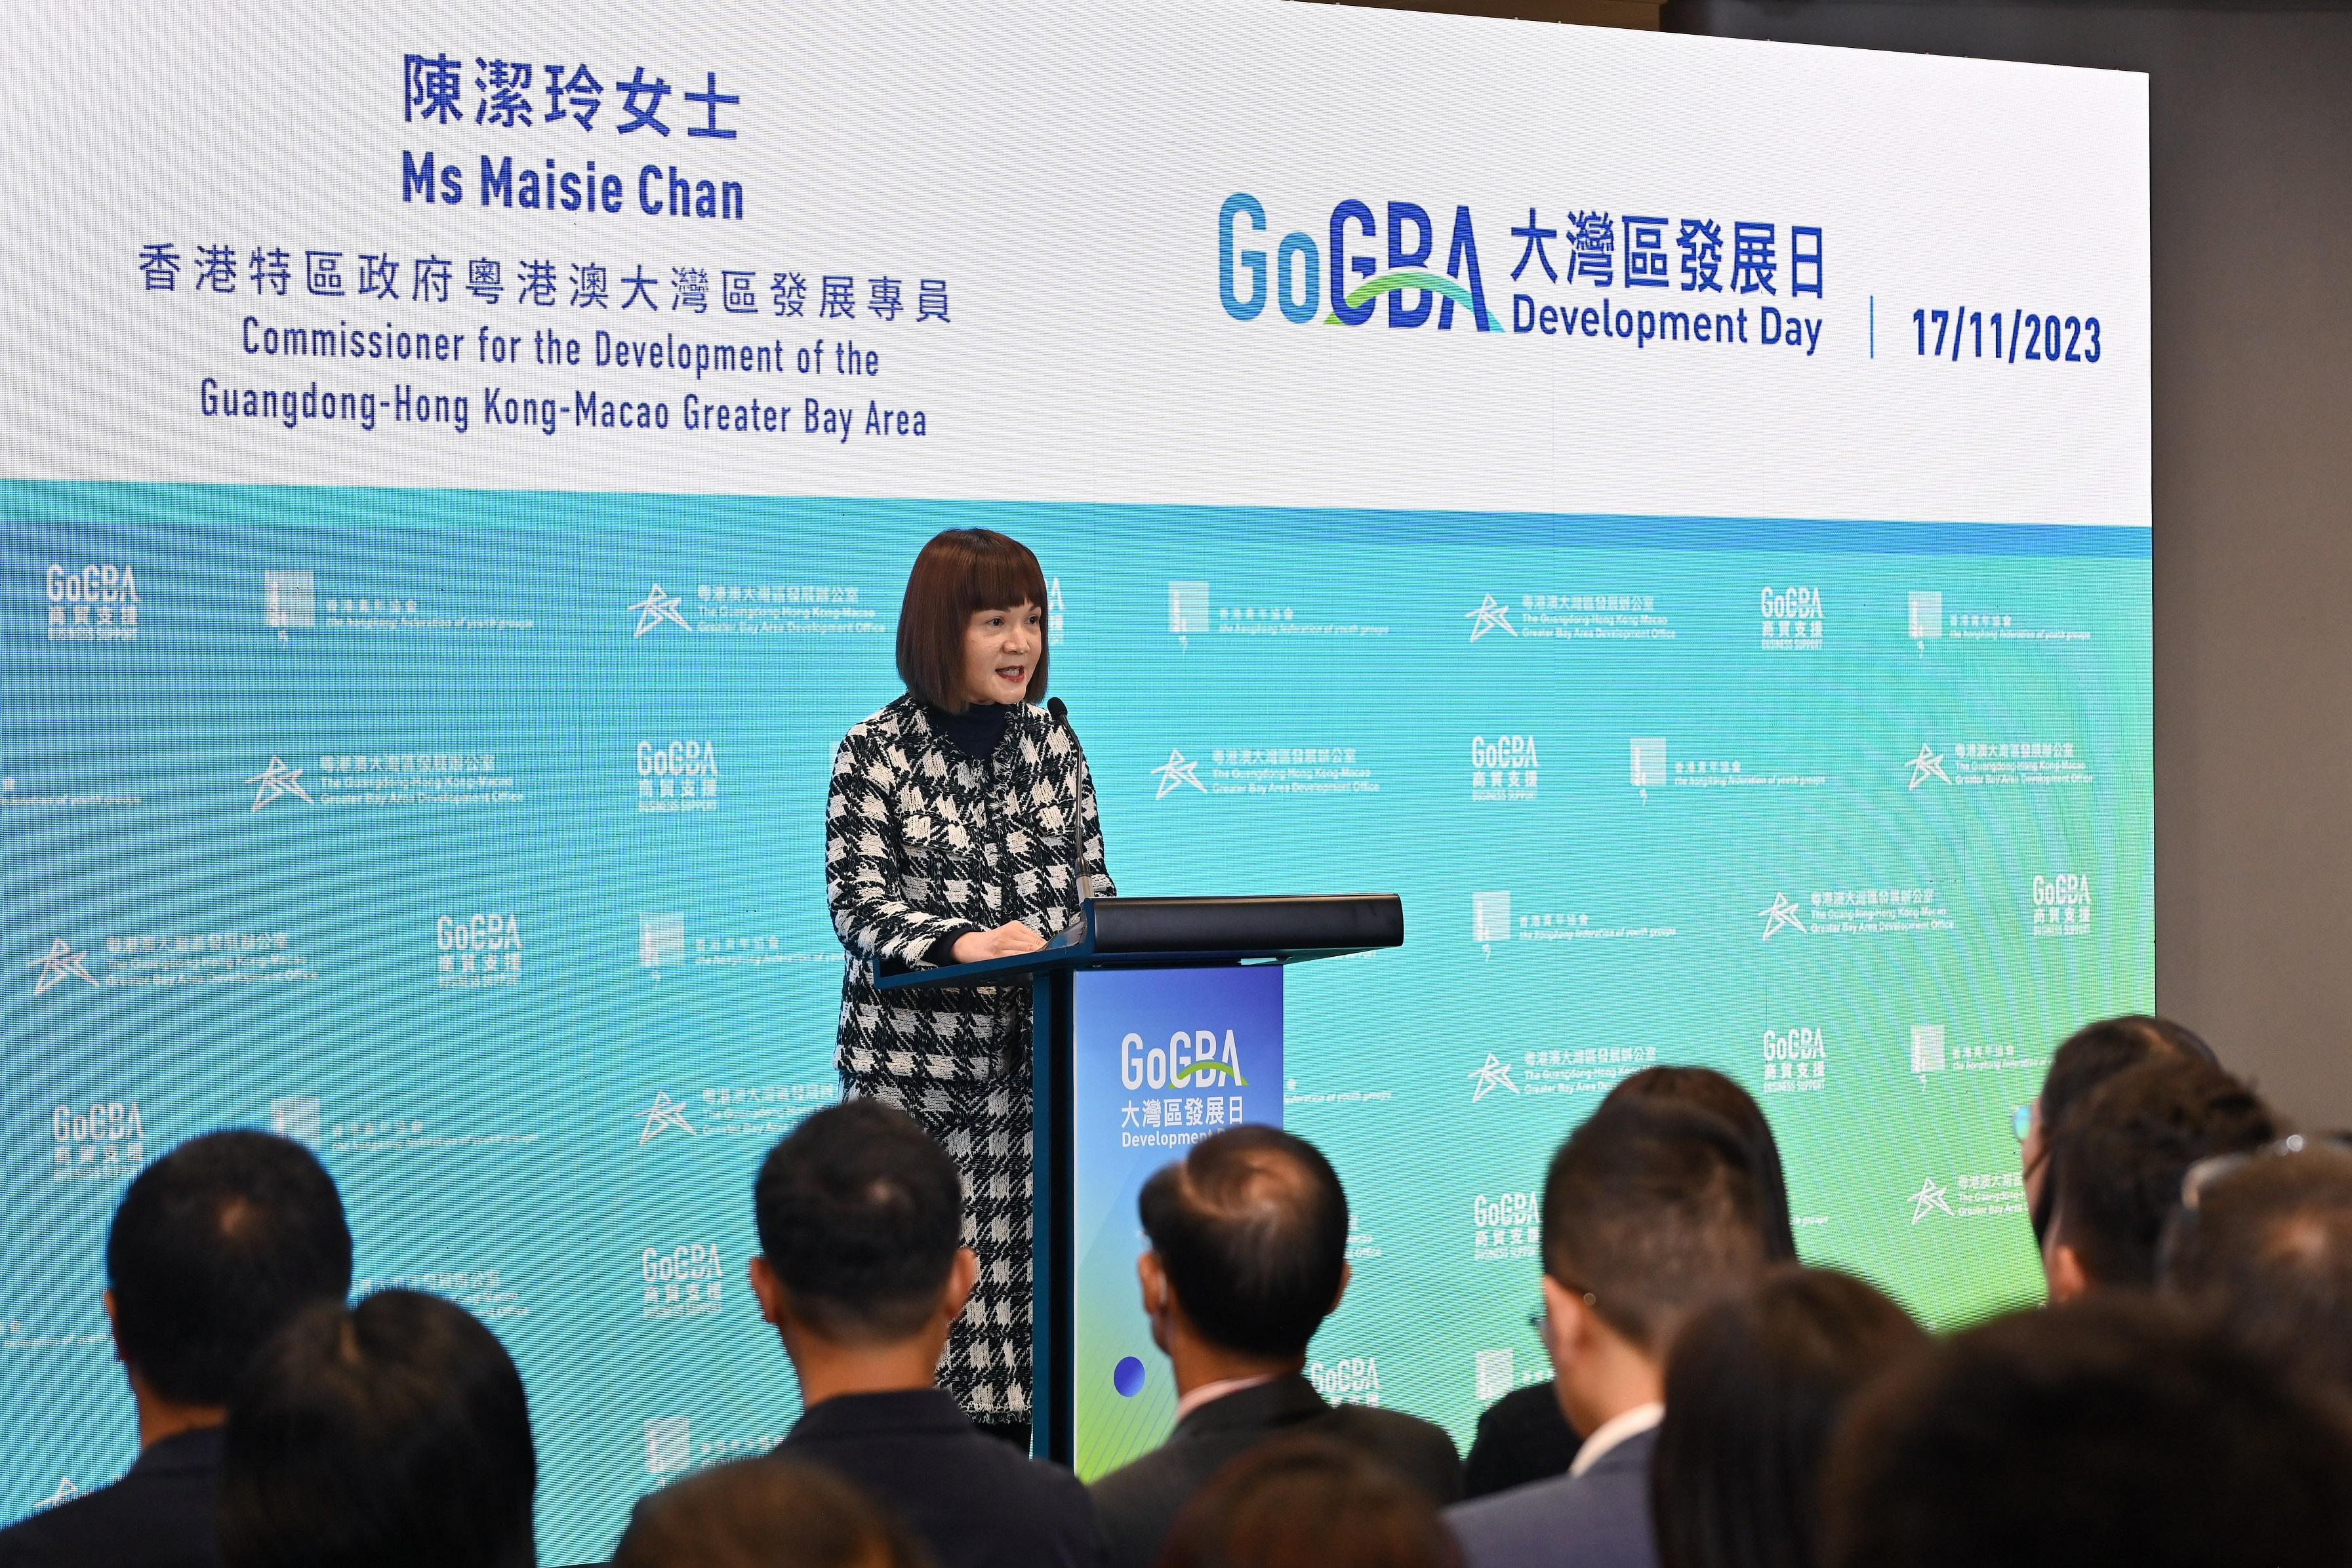 The Commissioner for the Development of the Guangdong-Hong Kong-Macao Greater Bay Area, Ms Maisie Chan, delivers a speech at the GoGBA Development Day today (November 17).